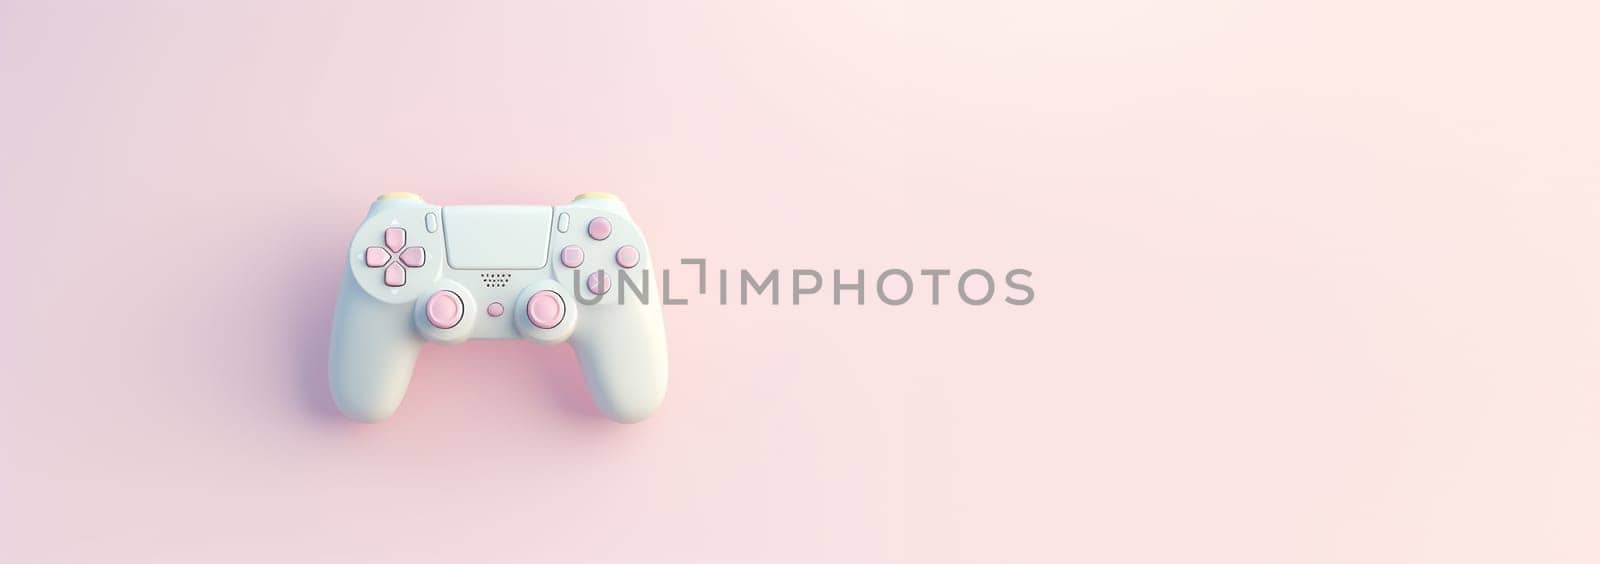 Game controller pastel colored background. pastel Joystick illustration. Gamepad for game console. 3D render copy space. Colorful video game concept Space for text web banner